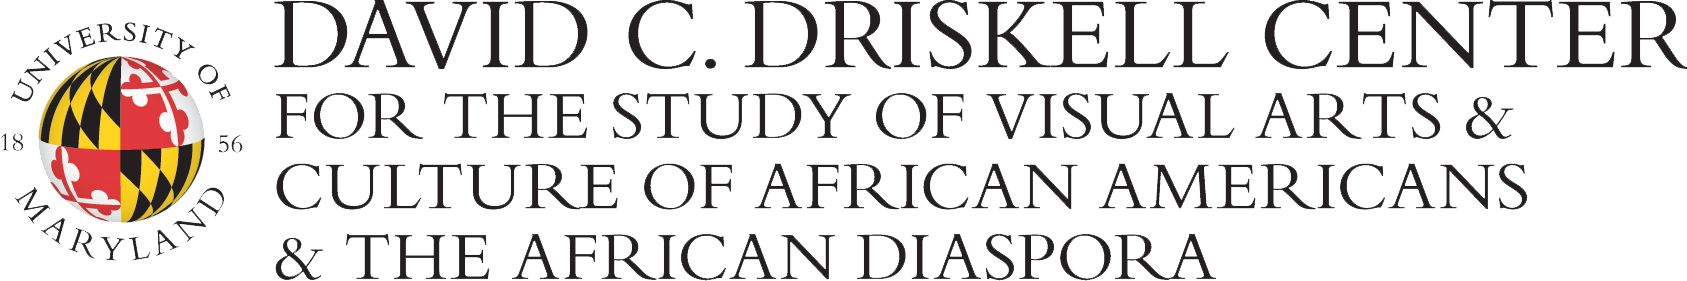 UMD David C. Driskell Center for the Visual Arts and Culture of African Americans and the African Diaspora Logo